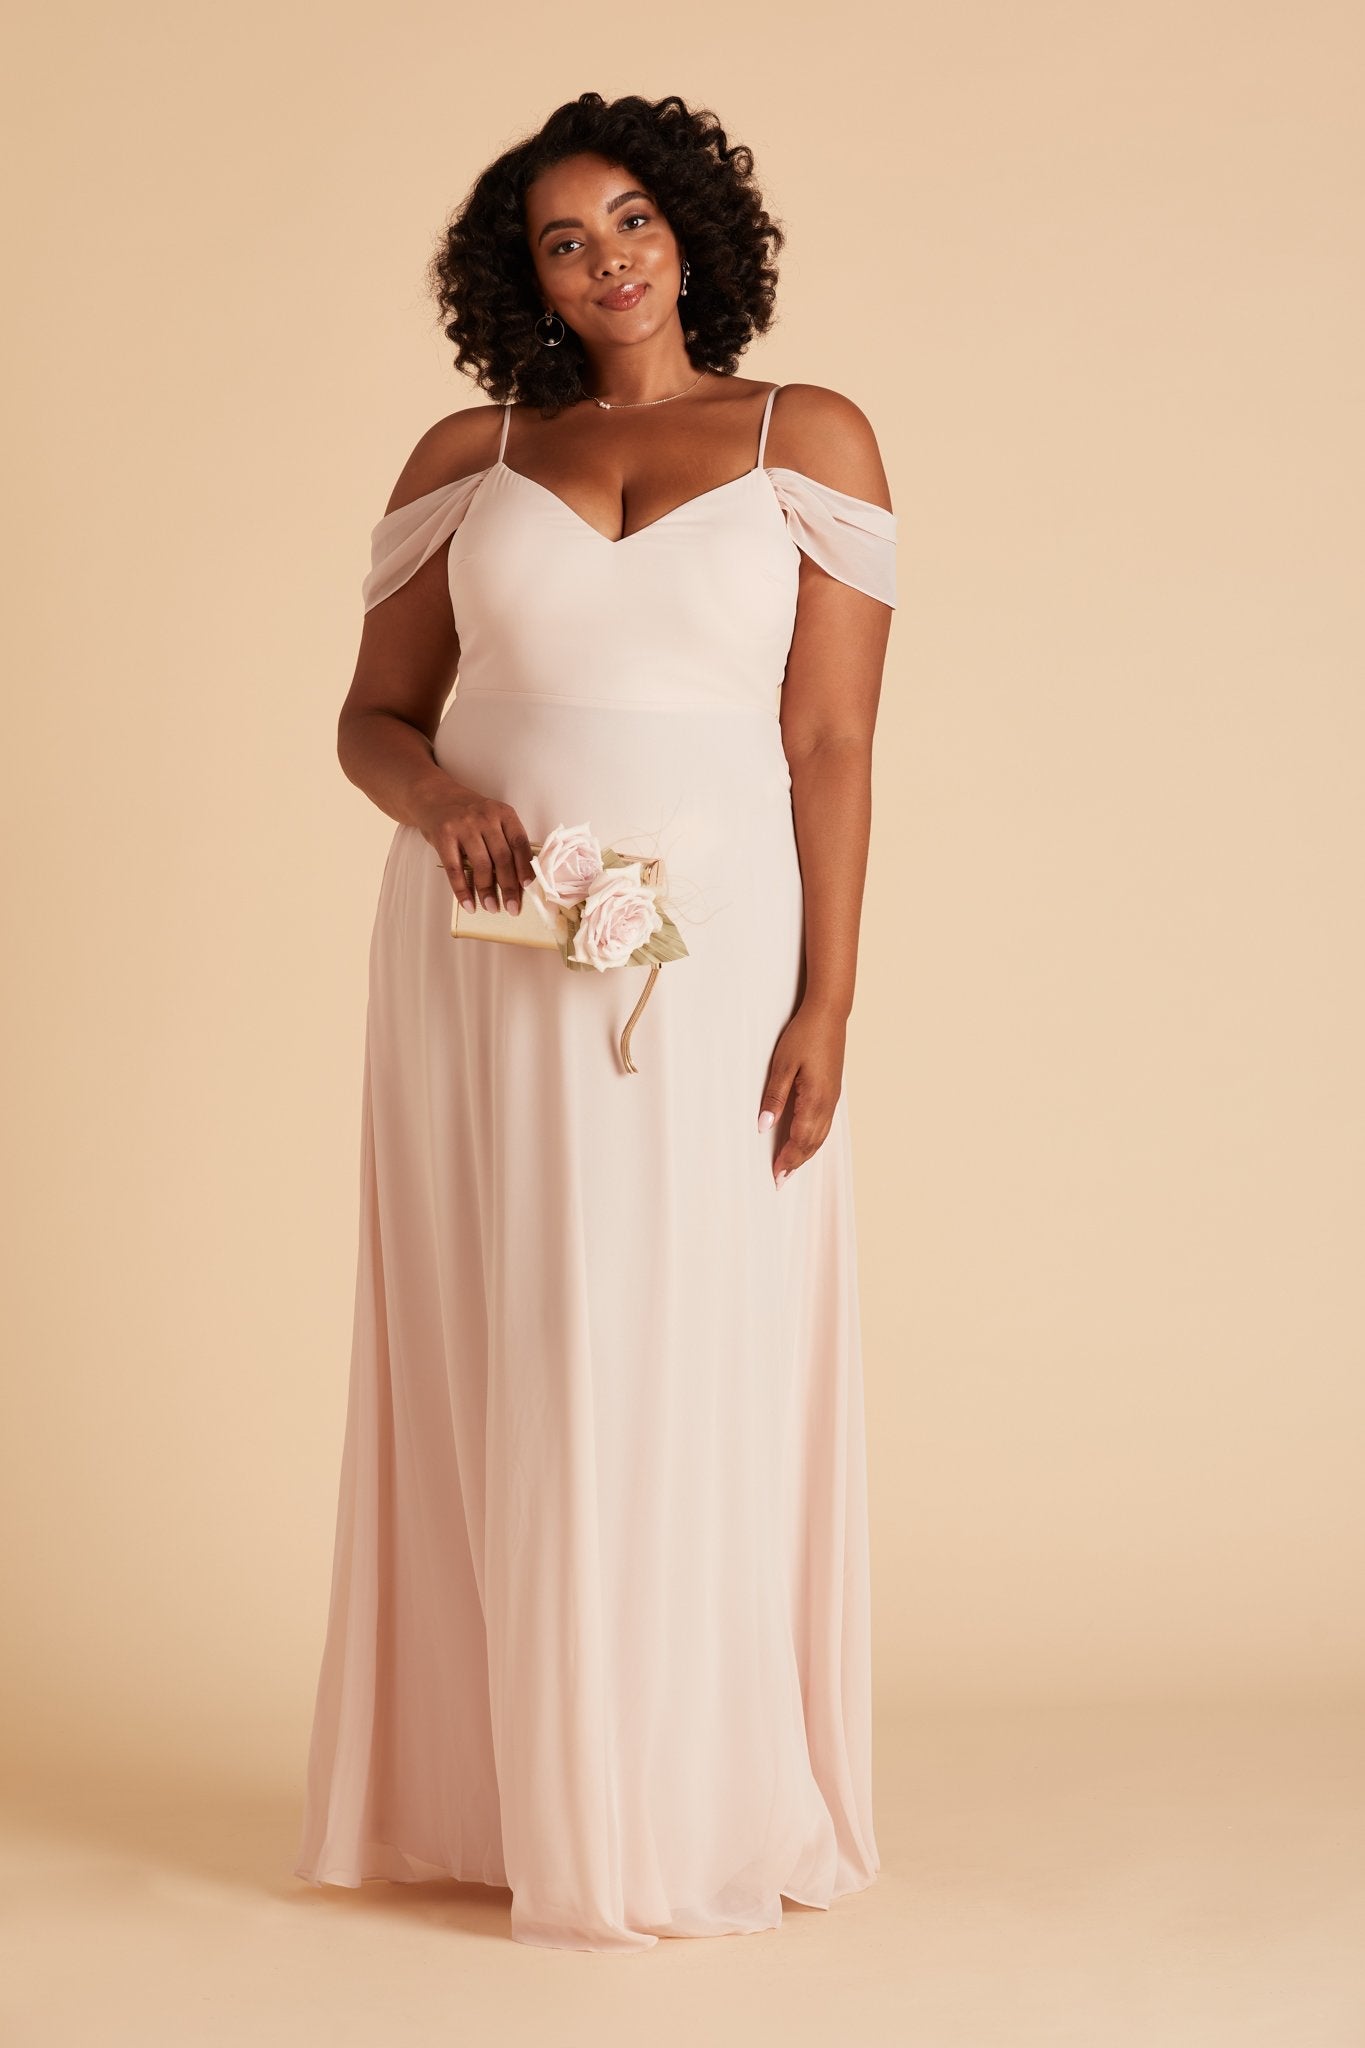 Devin convertible plus size bridesmaids dress in pale blush chiffon by Birdy Grey, front view